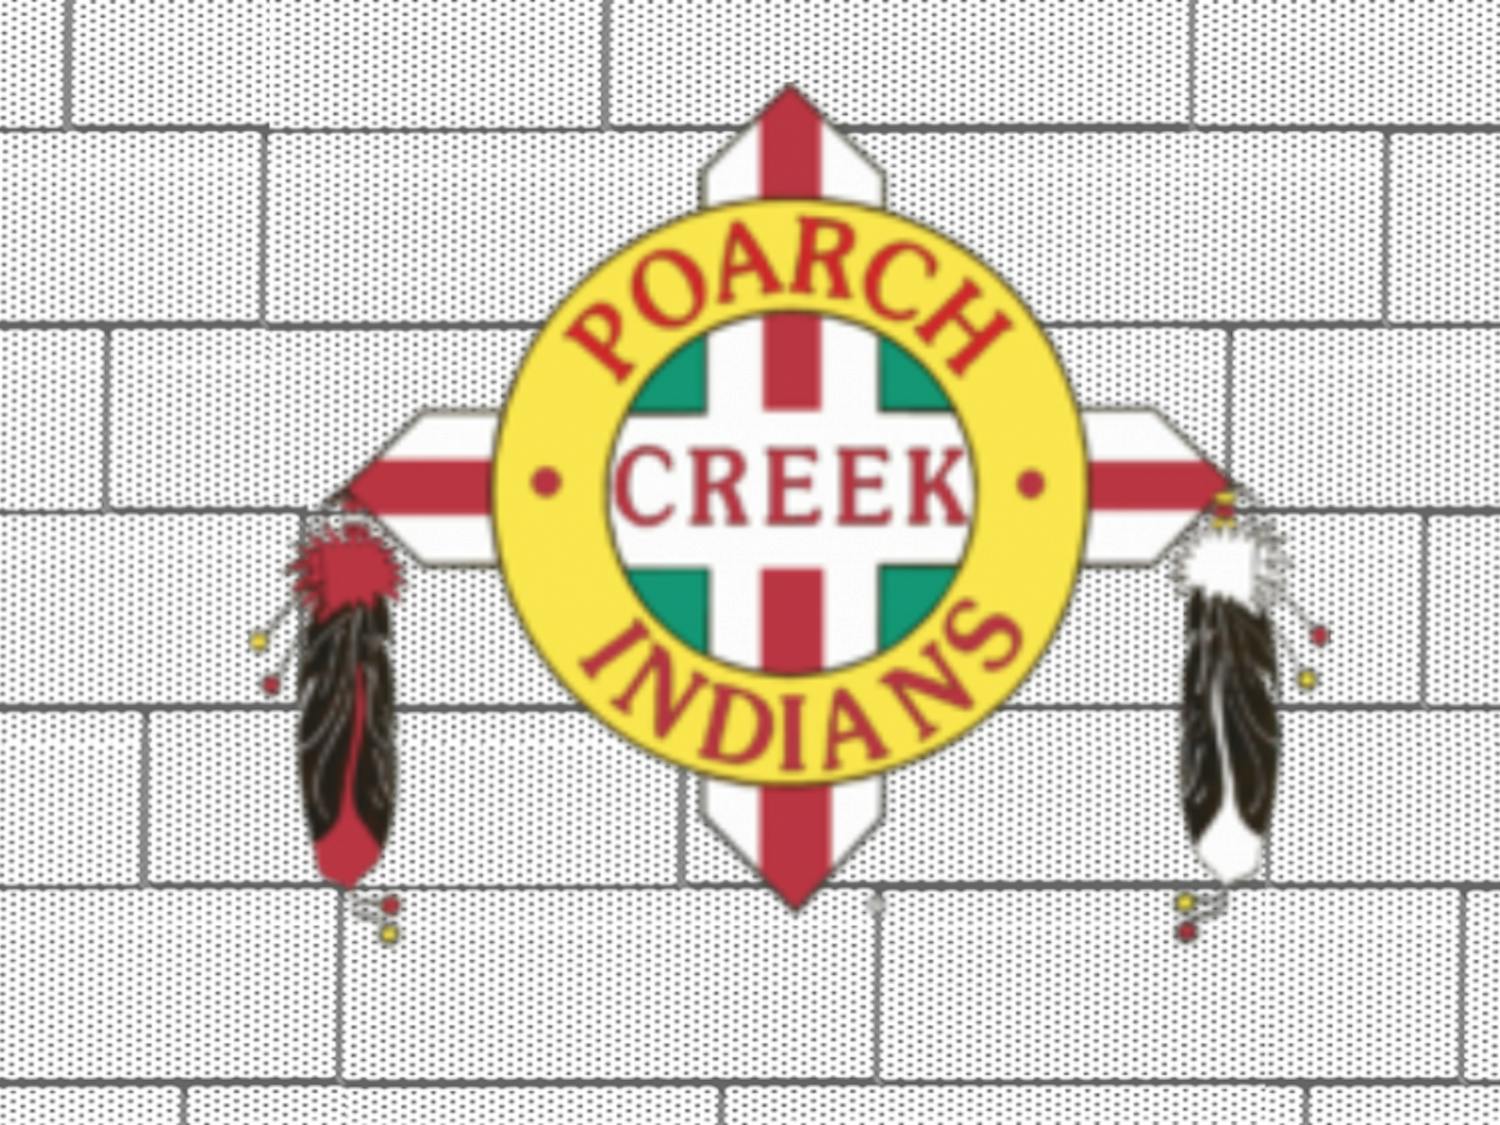 Poarch Band of Creek Indians 